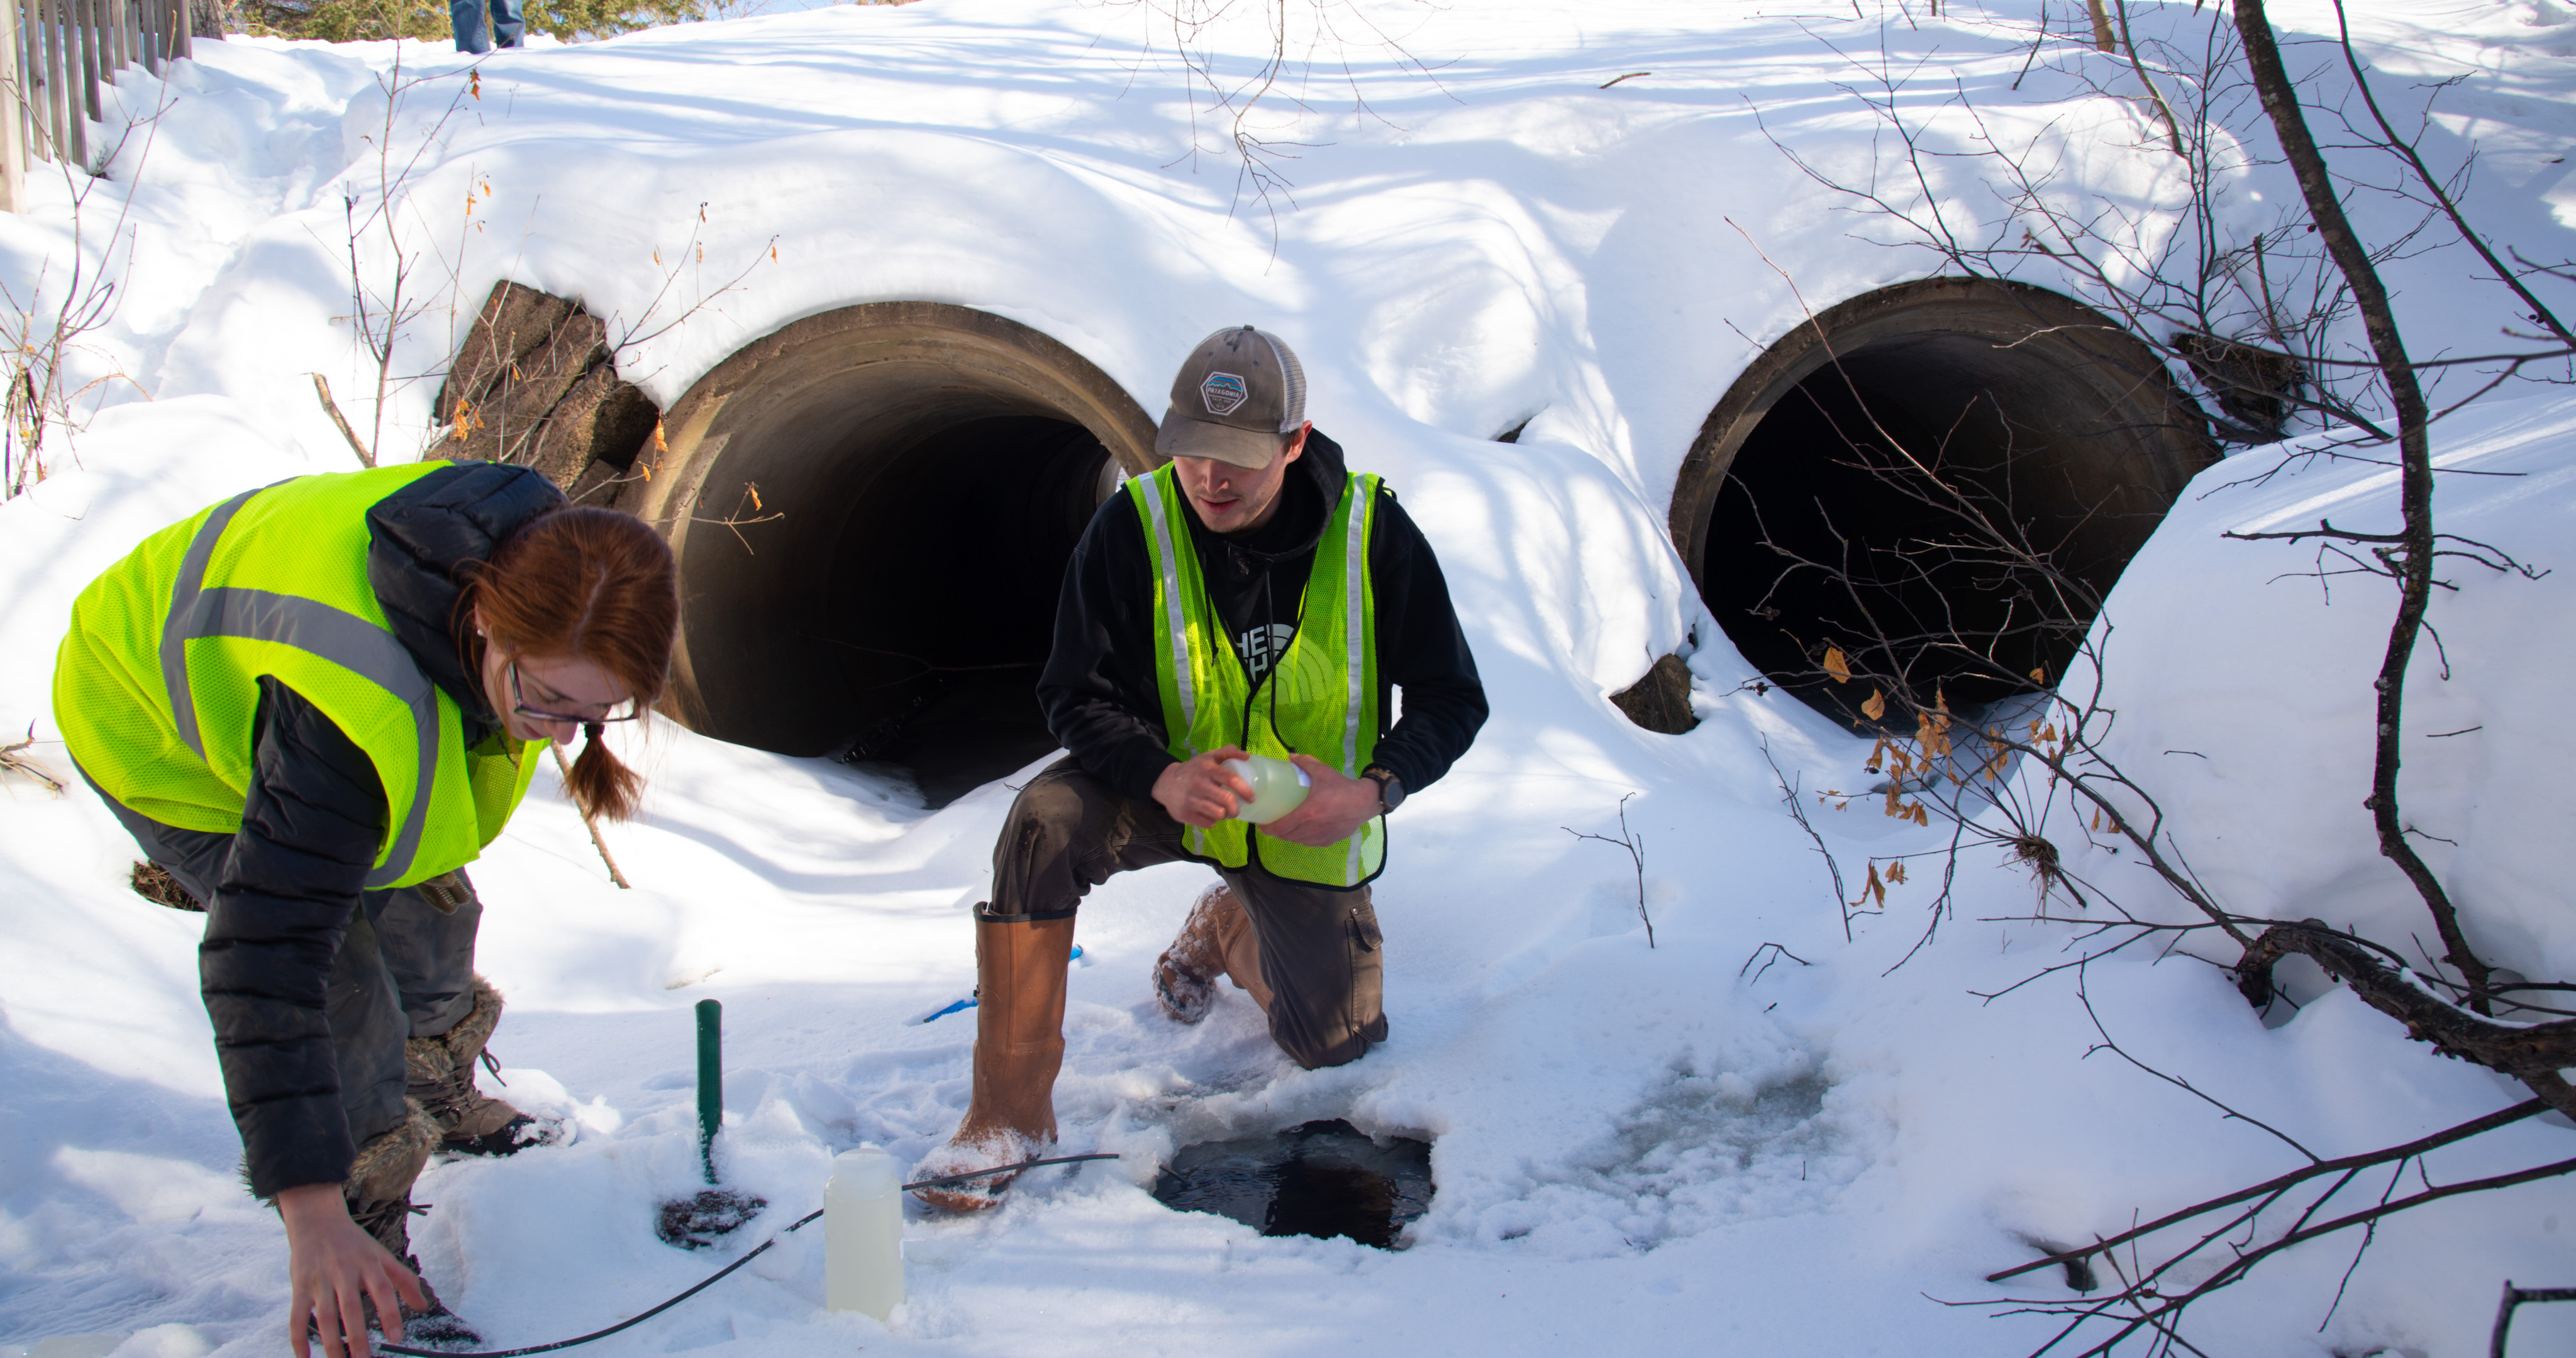 Two students next to a drainage pipe in the snow, using scientific equipment.